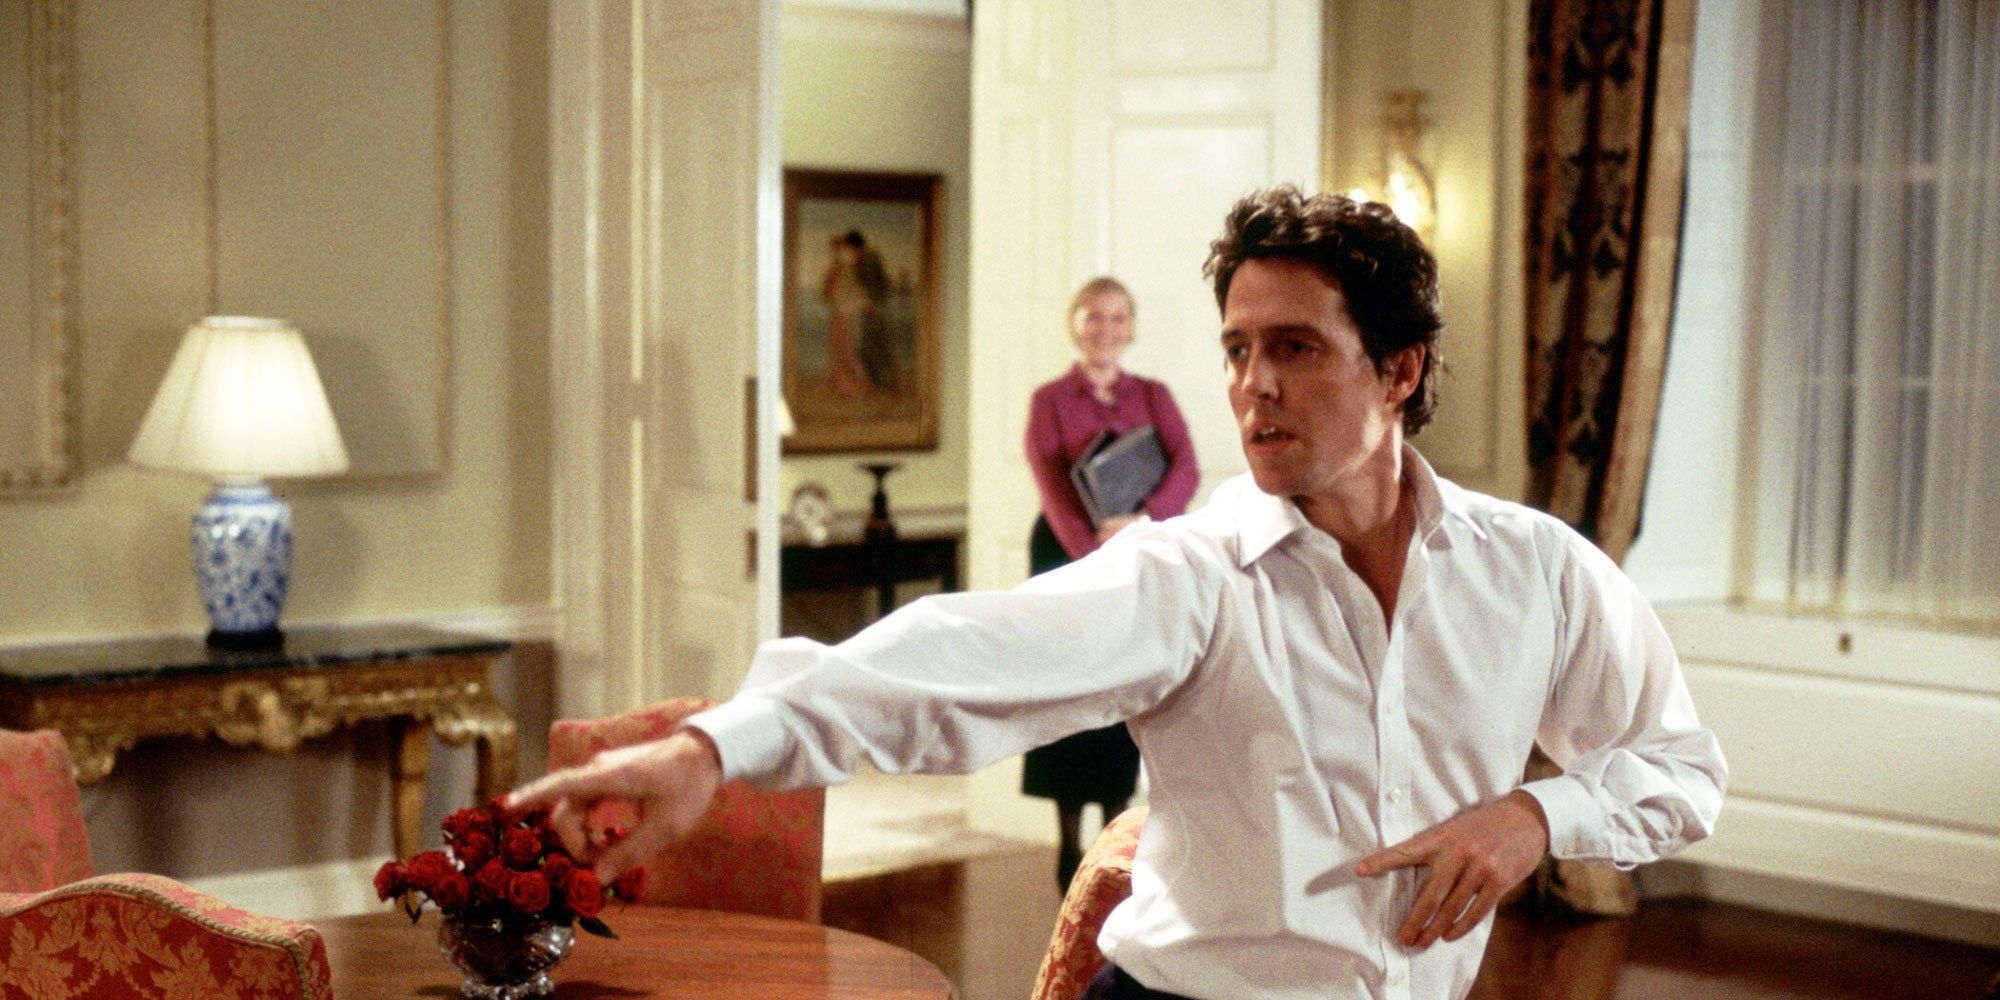 Official image of the movie Love Actually (2003).